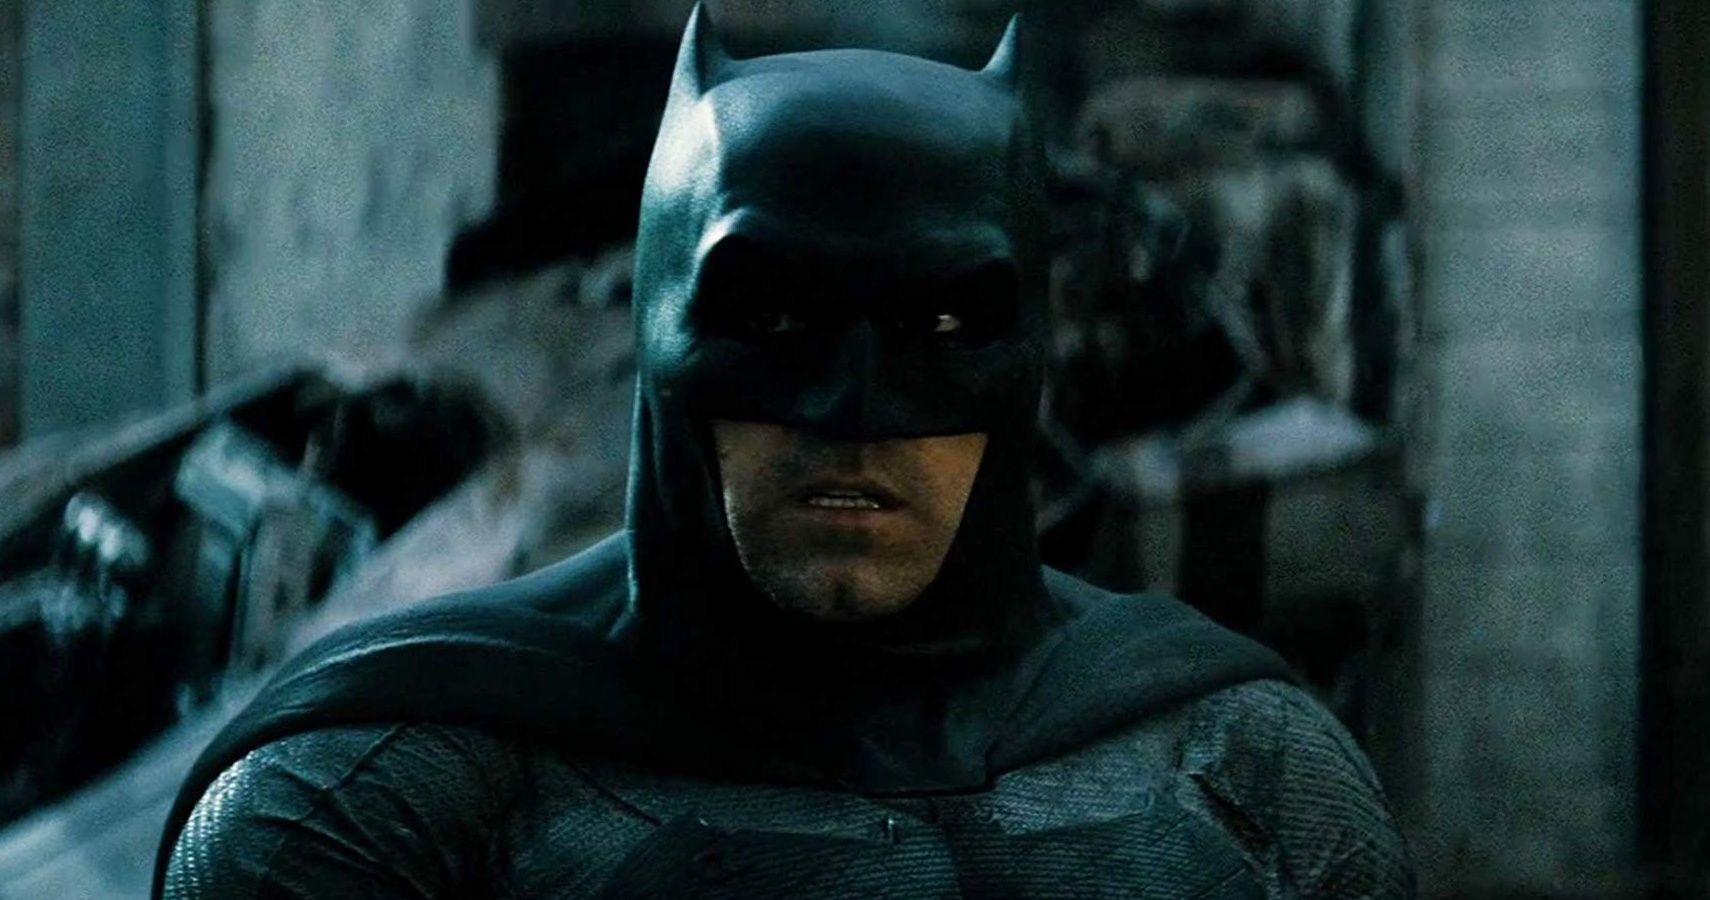 Batman: All Live-Action Movies Ranked According To Rotten Tomatoes Audience Score